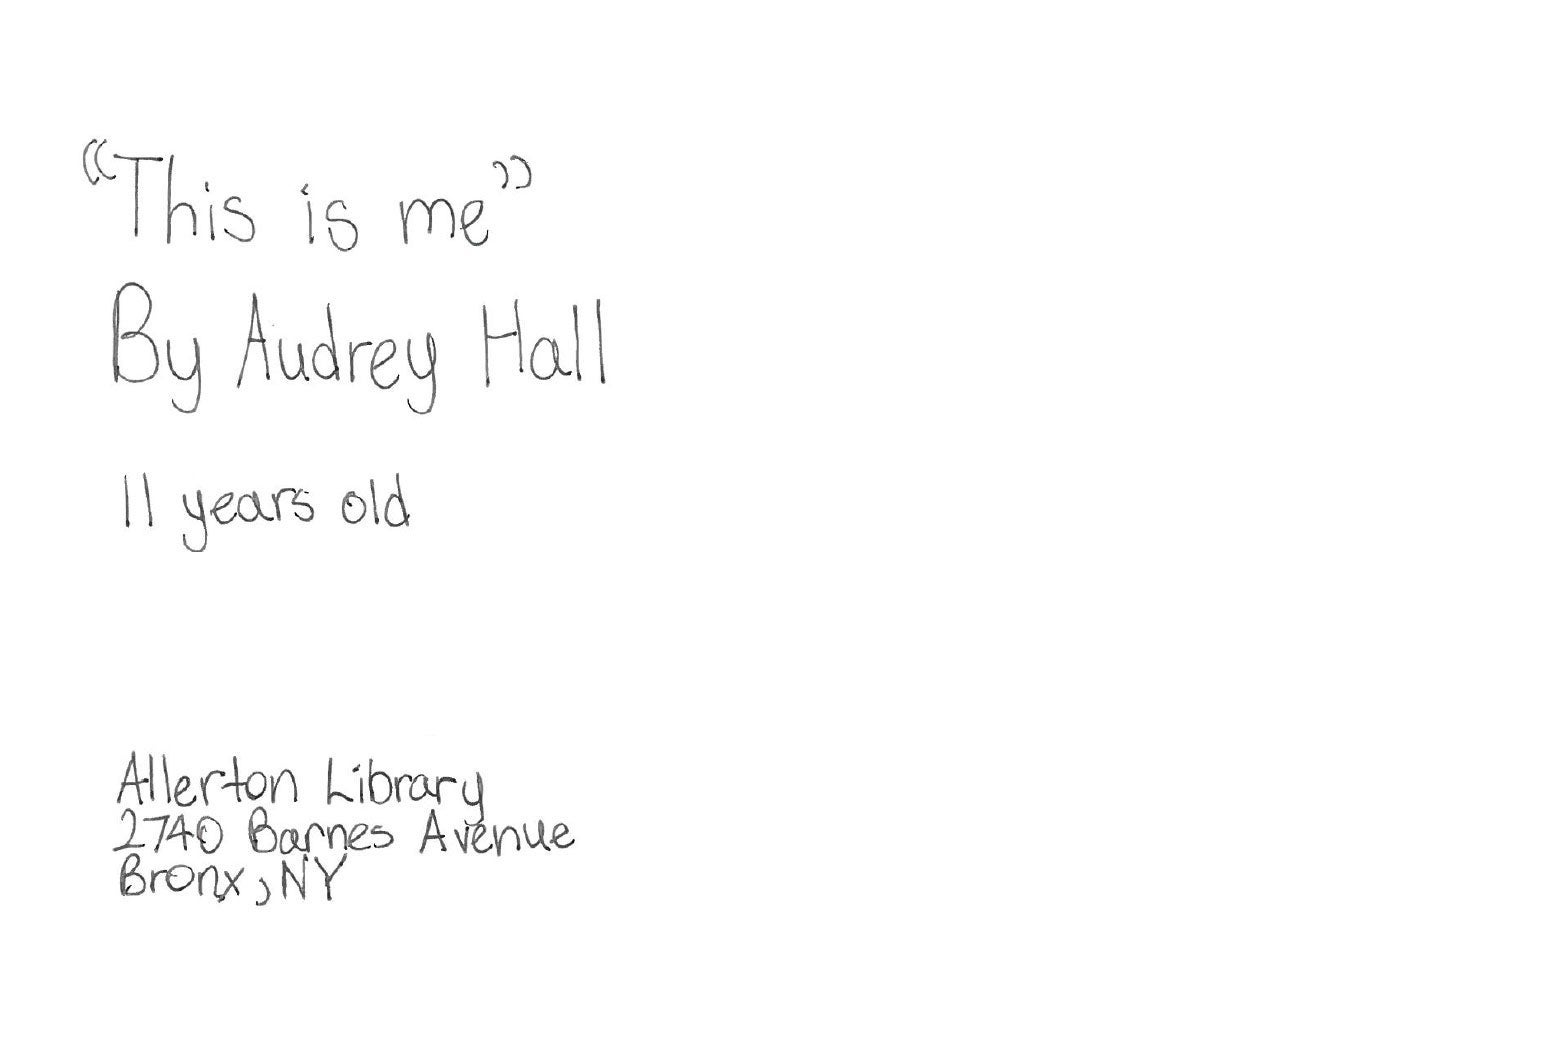 "This is me" by Audrey Hall, 11 years old. Allerton Library, 2740 Barnes Avenue, Bronx, NY.